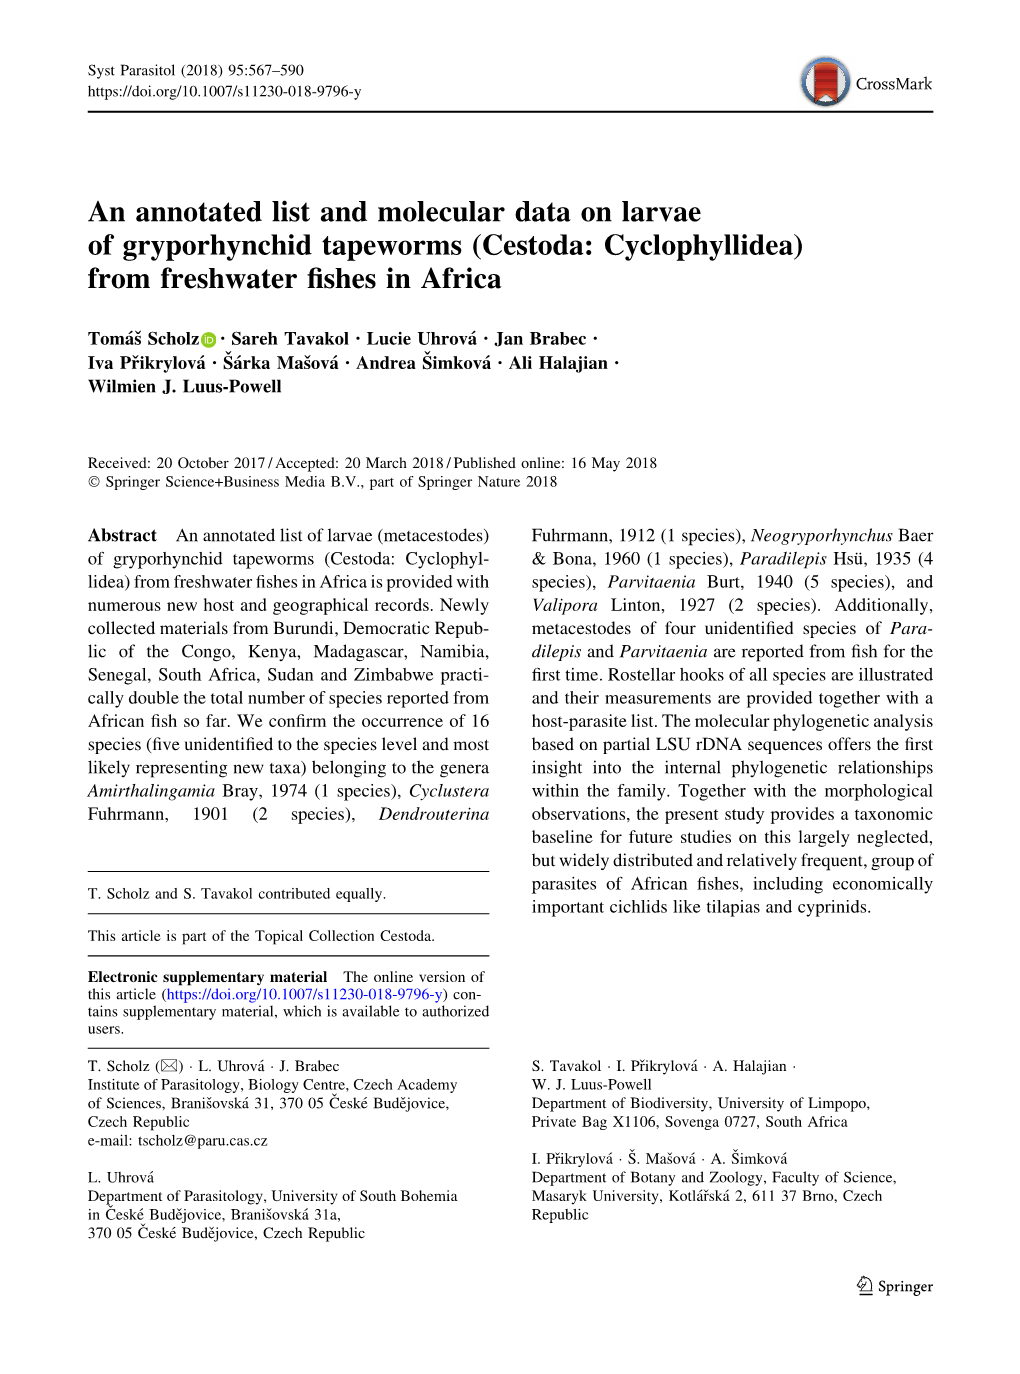 An Annotated List and Molecular Data on Larvae ... -.:University of Limpopo